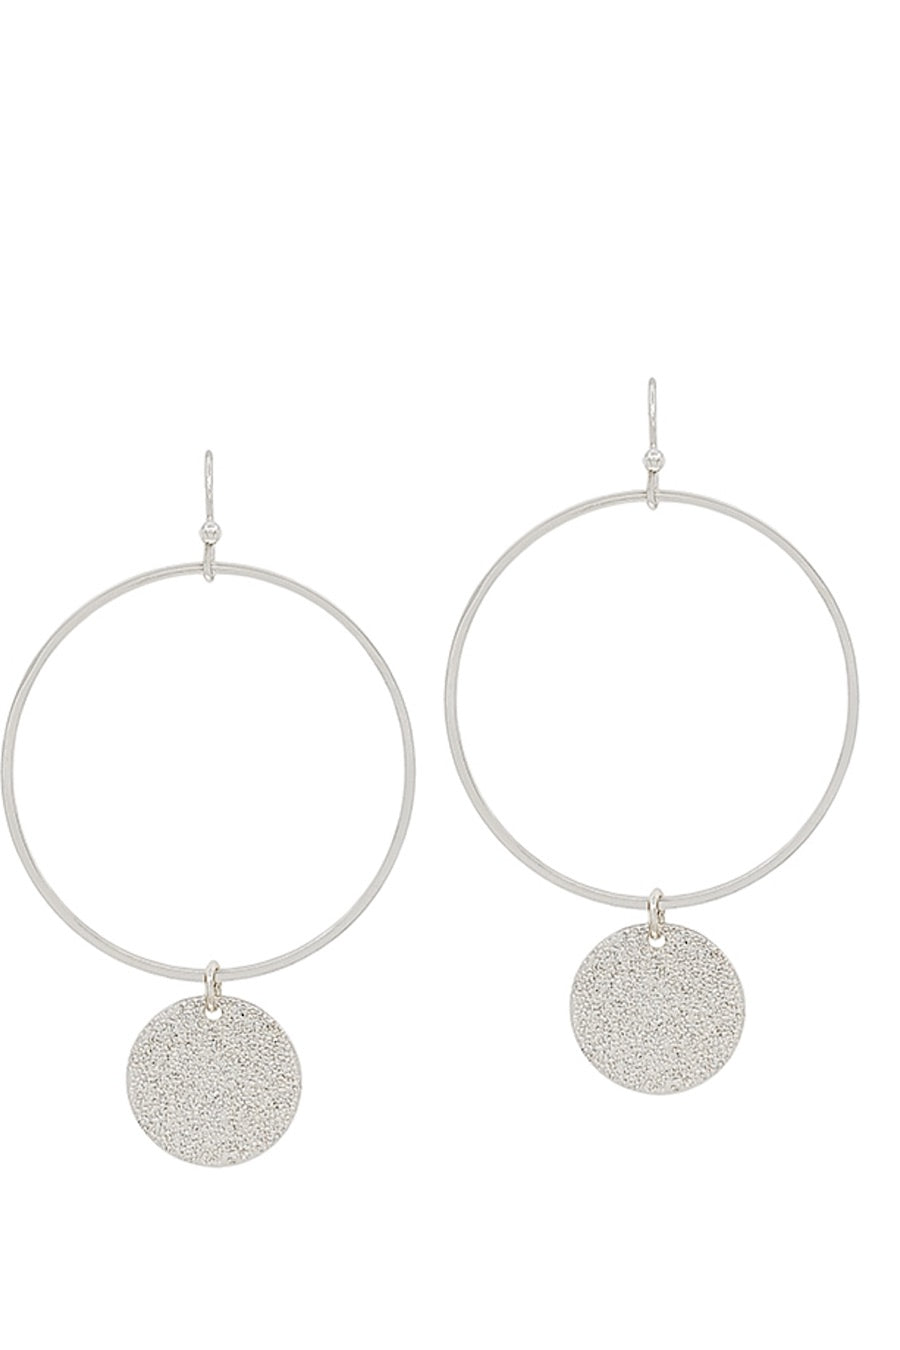 Shiny Disc Circle Earrings in Silver or Gold